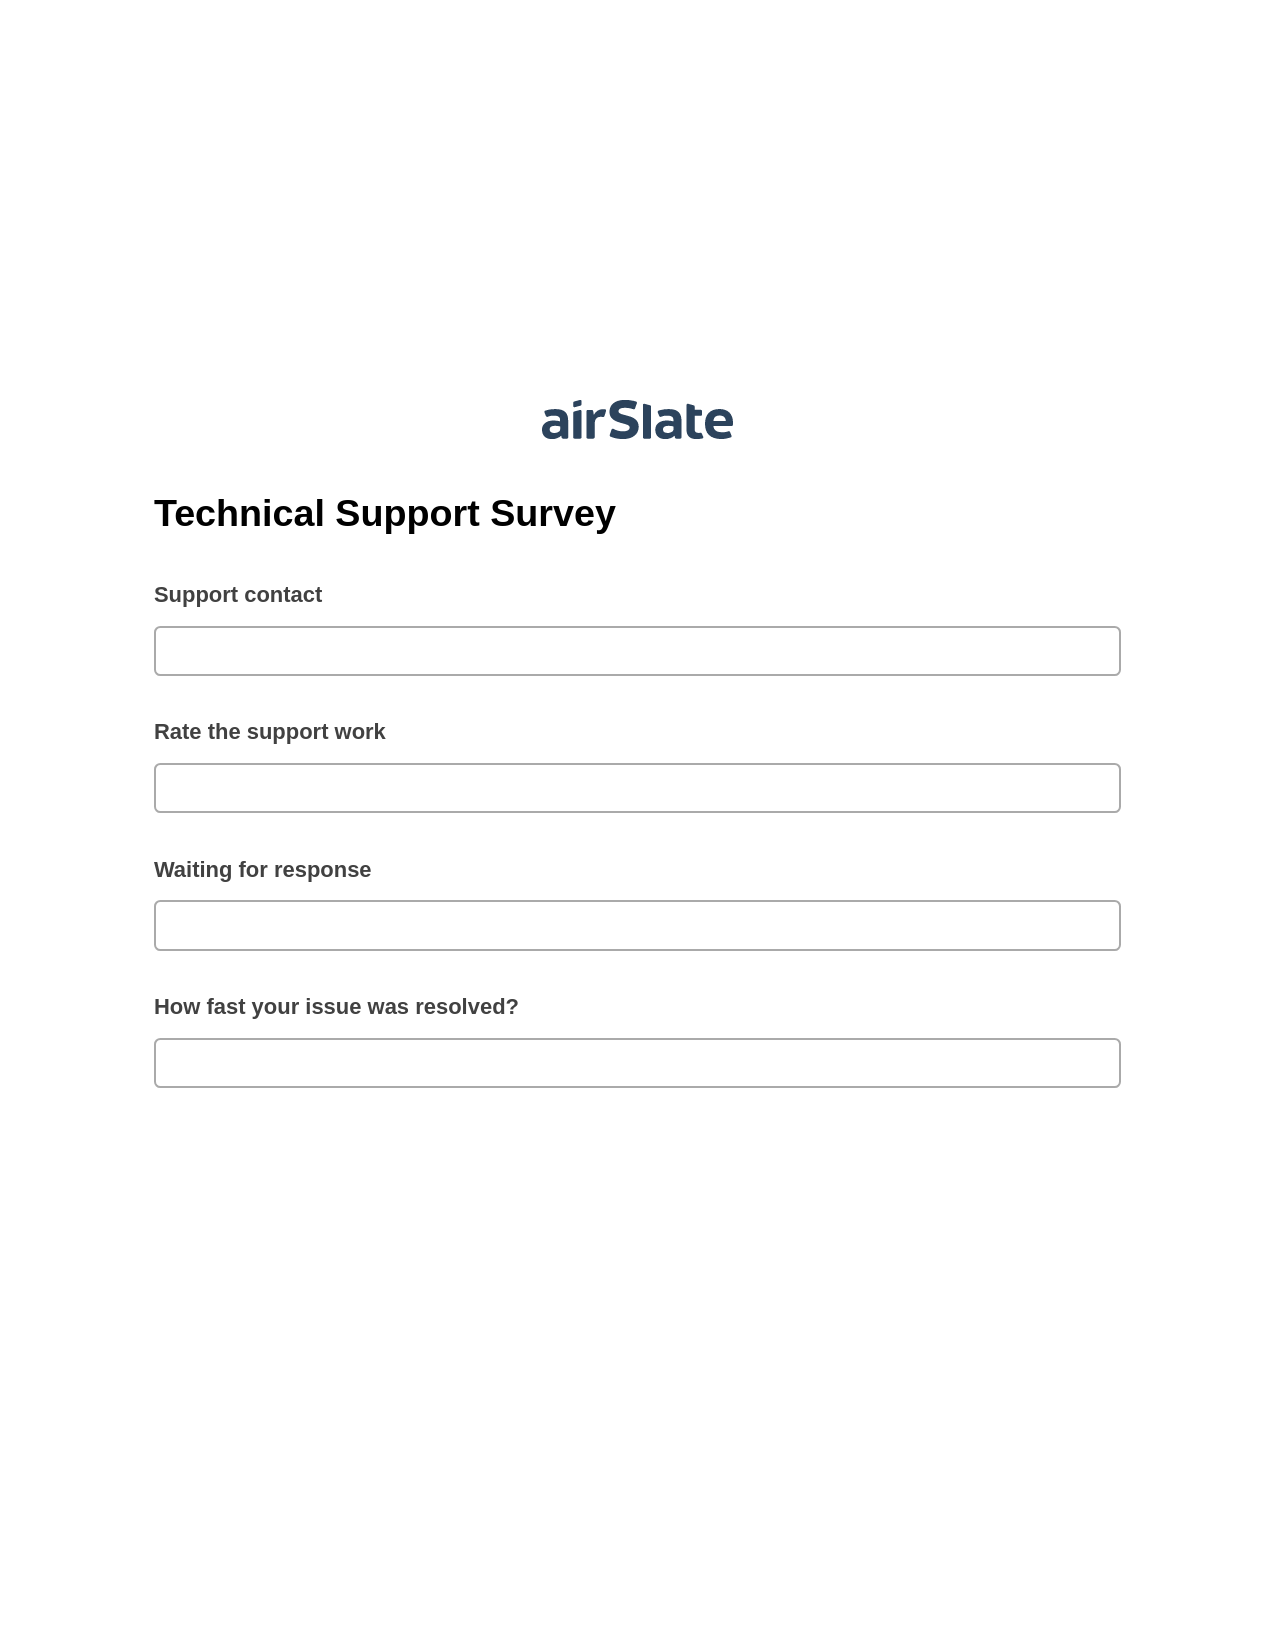 Multirole Technical Support Survey Prefill from NetSuite records, Create slate from another Flow Bot, Export to NetSuite Bot